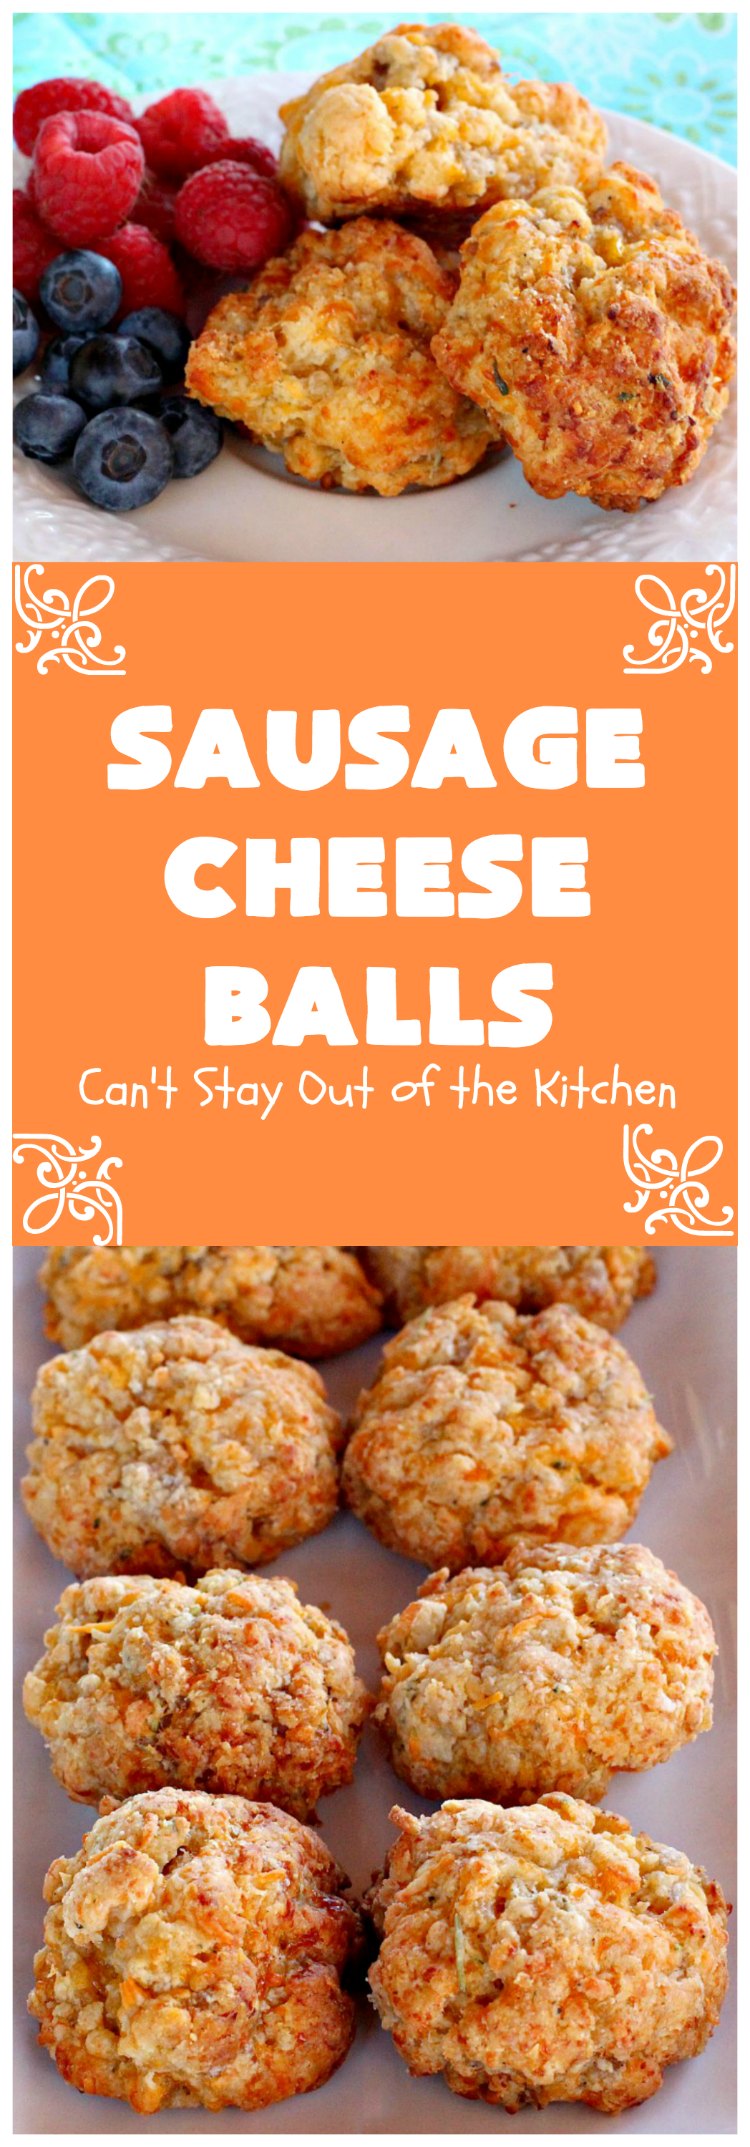 Sausage Cheese Balls | Can't Stay Out of the Kitchen | these fantastic #SausageBalls are terrific as an #appetizer for #Tailgating parties, potlucks or the #SuperBowl! They're also wonderful for #Breakfast. #Holiday #HolidayBreakfast #HolidayAppetizer #pork #Sausage #CheddarCheese #Bisquick 